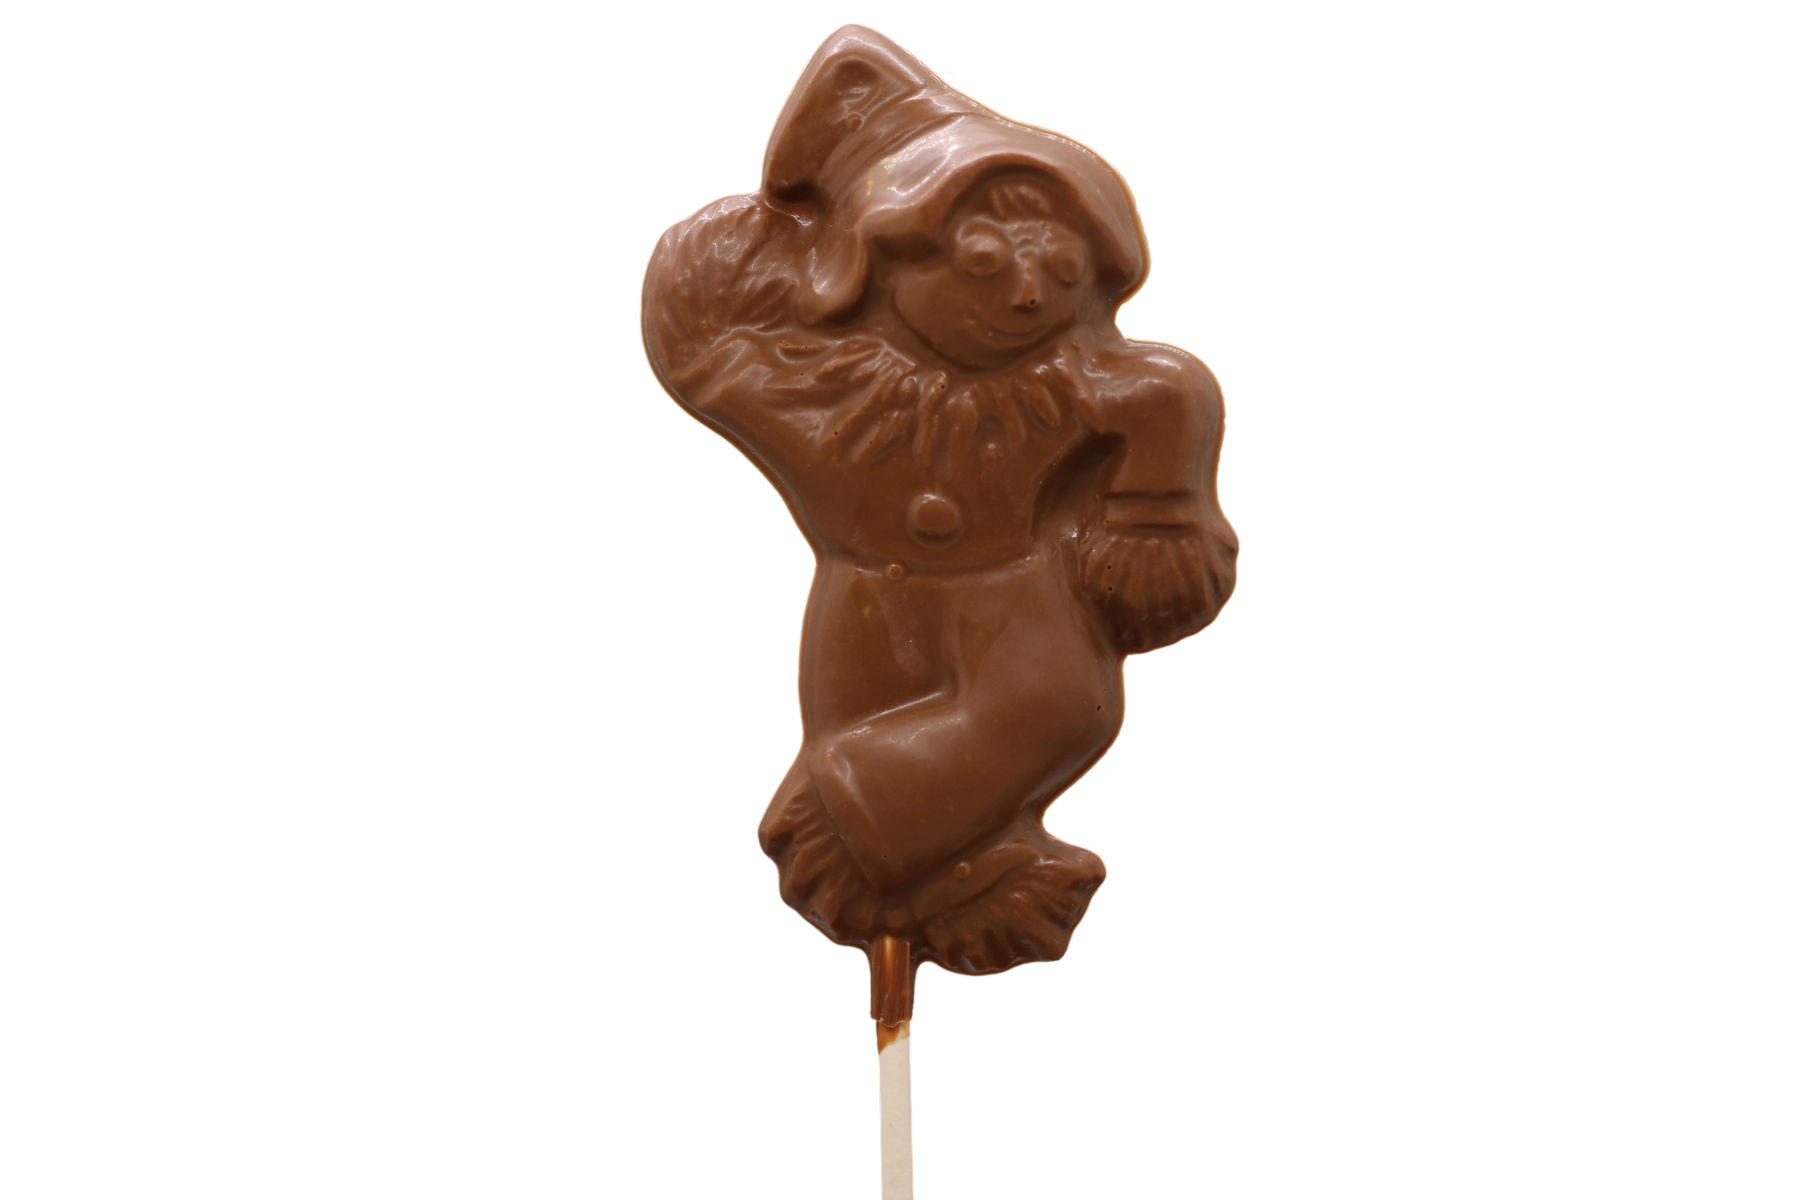 Indulge in the charm of our Milk Chocolate Scarecrow Pop – a delightful Halloween treat with creamy chocolate goodness and a touch of festive whimsy!